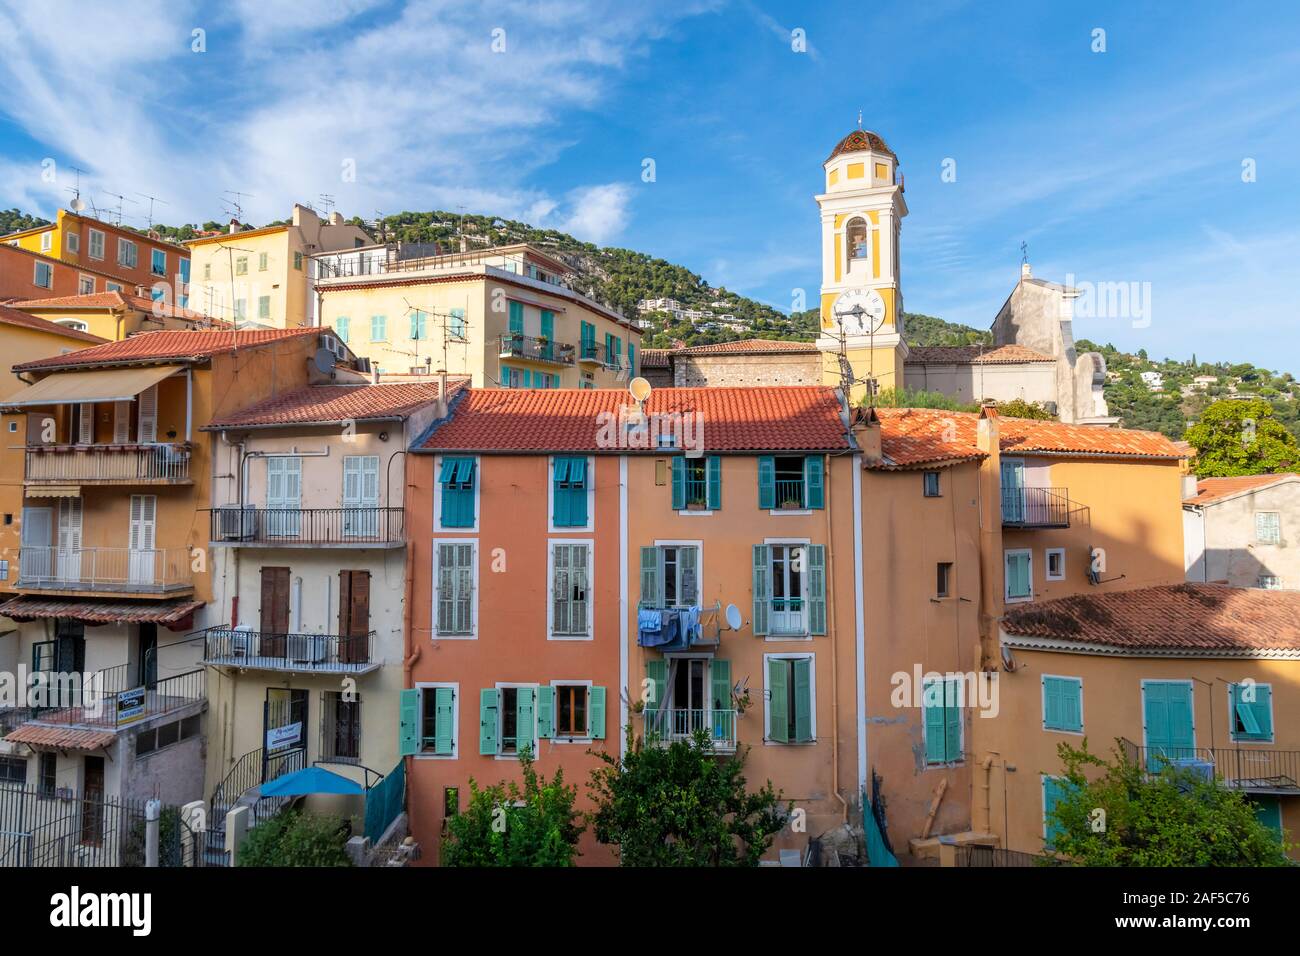 Colorful village of Villefranche Sur Mer, France and the yellow church